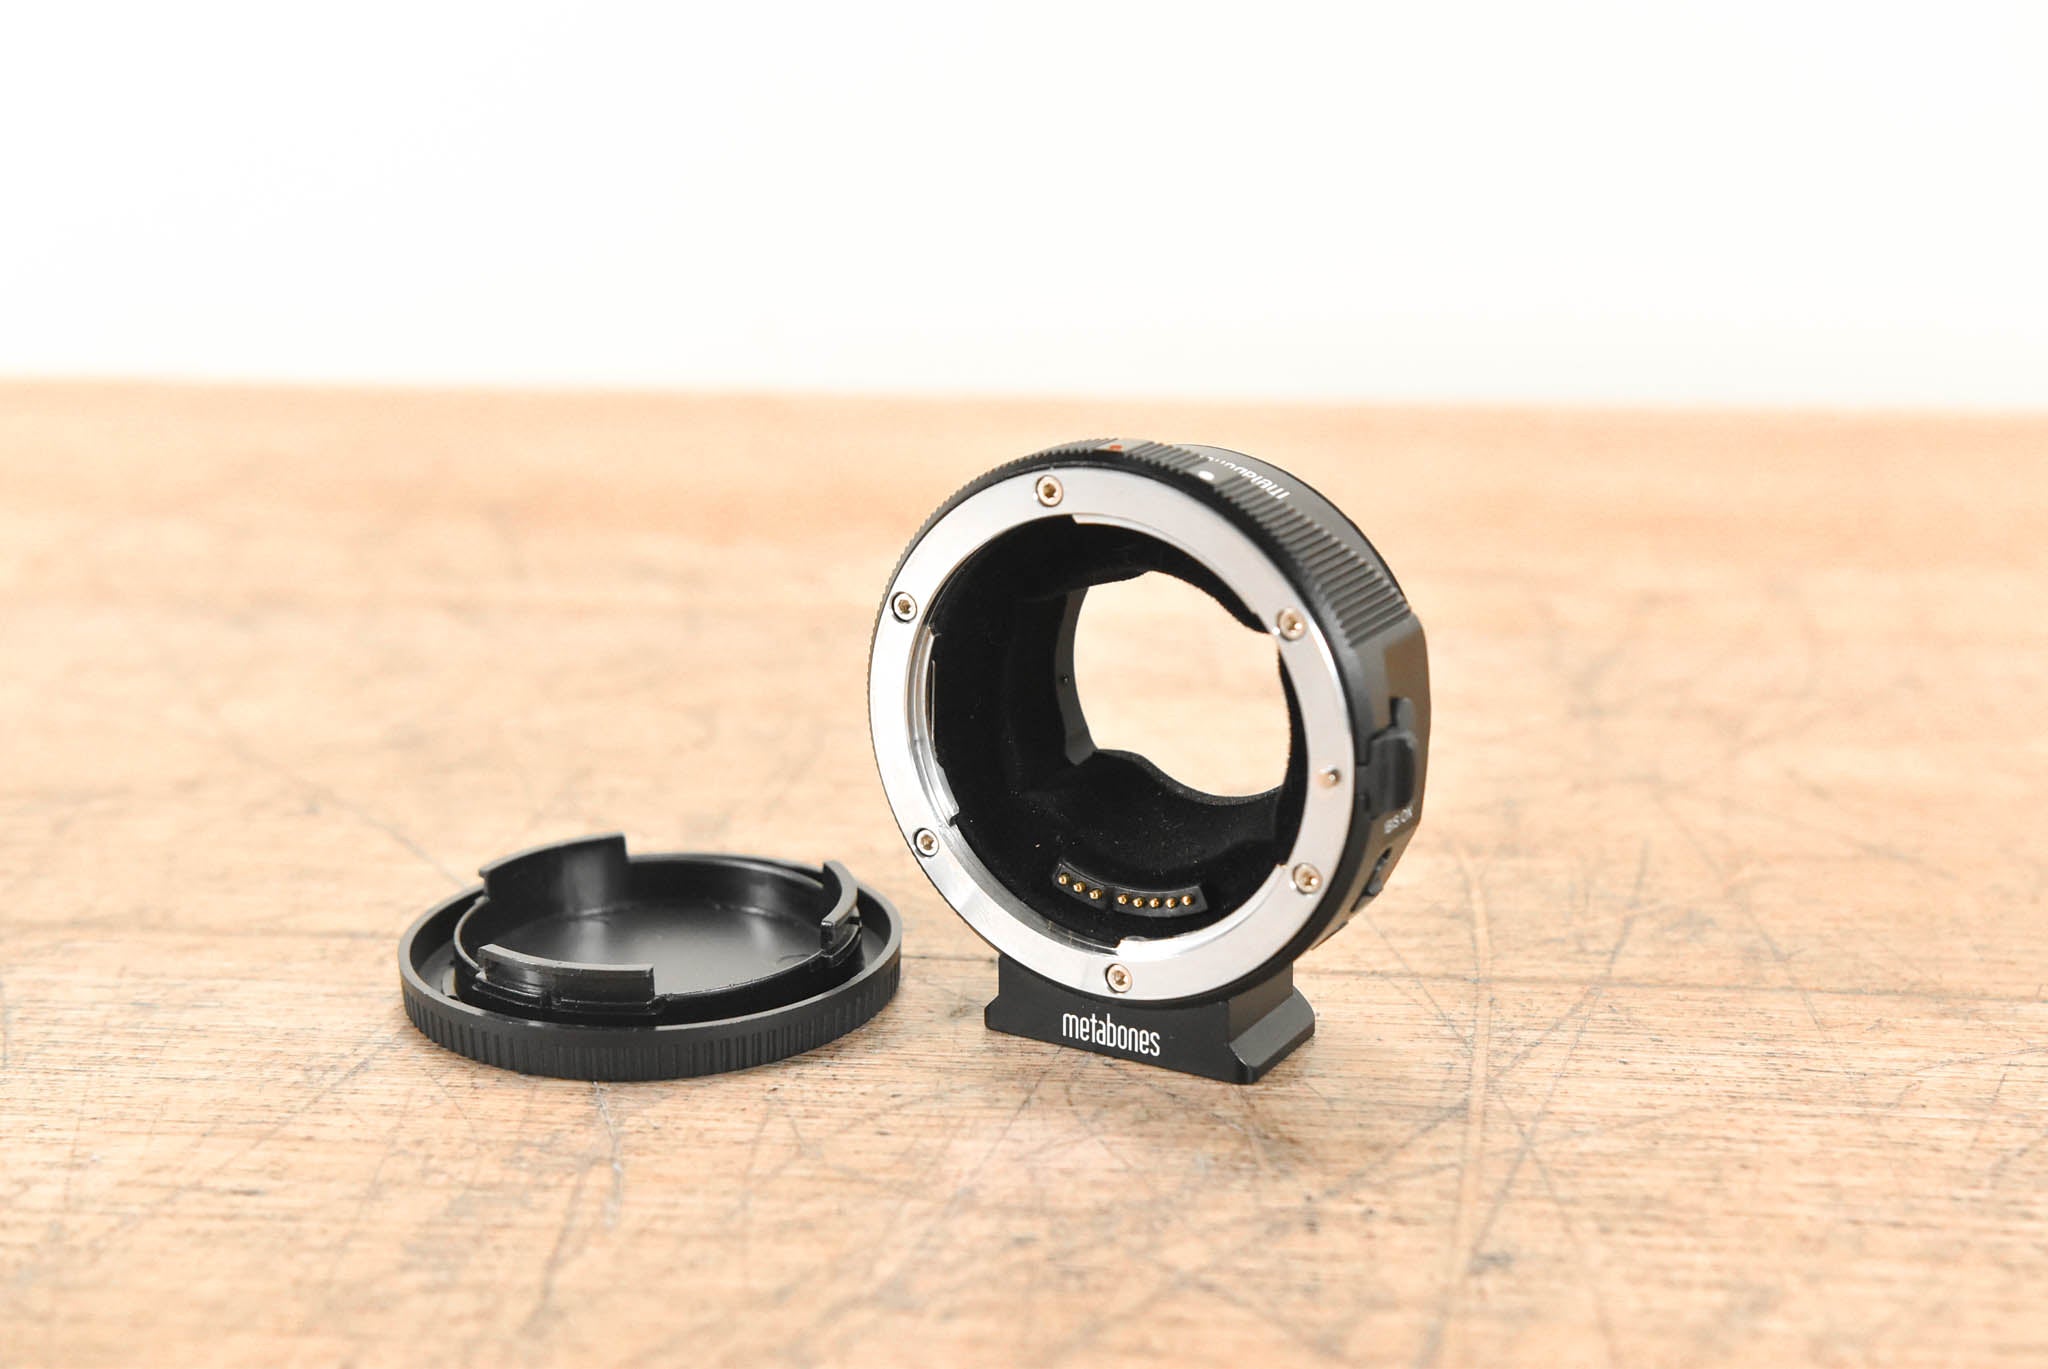 Metabones Canon EF Lens to Sony E Mount T Smart Adapter